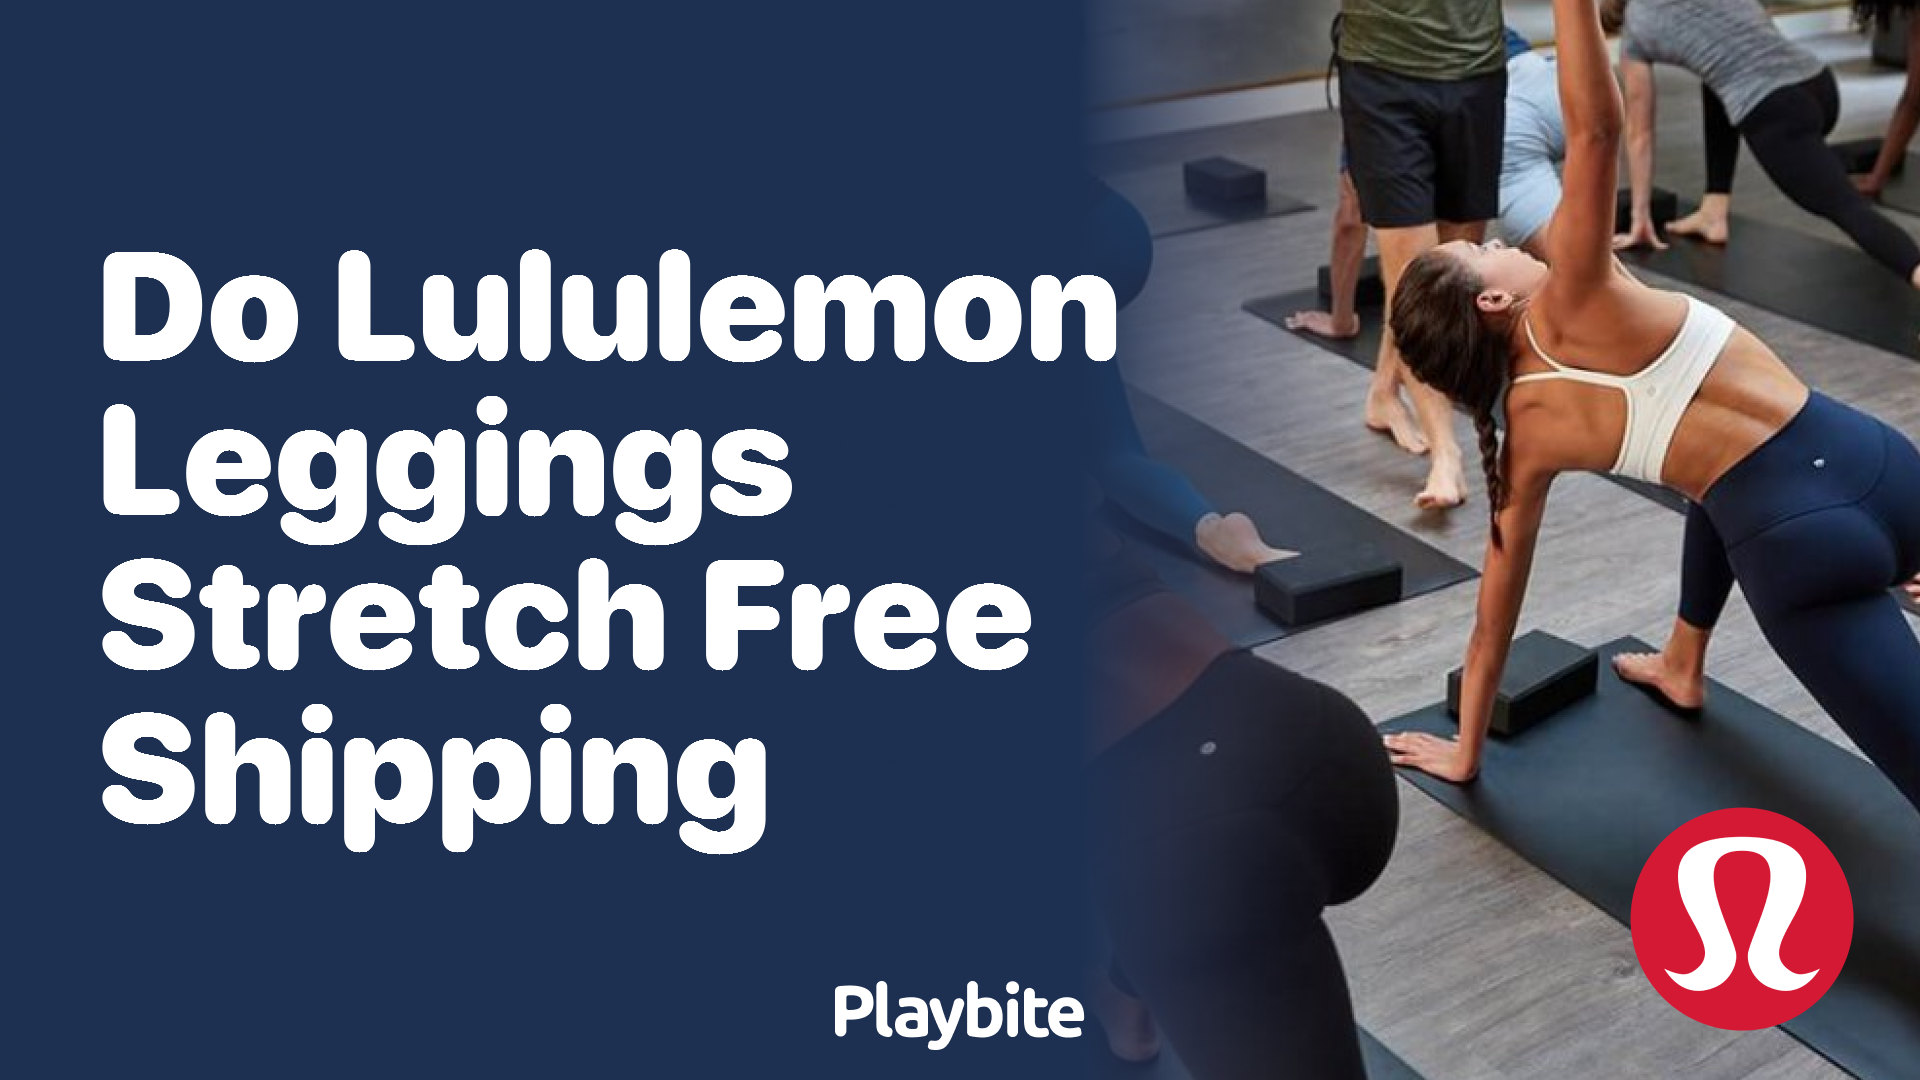 Do Lululemon Leggings Stretch? Find Out Here! - Playbite